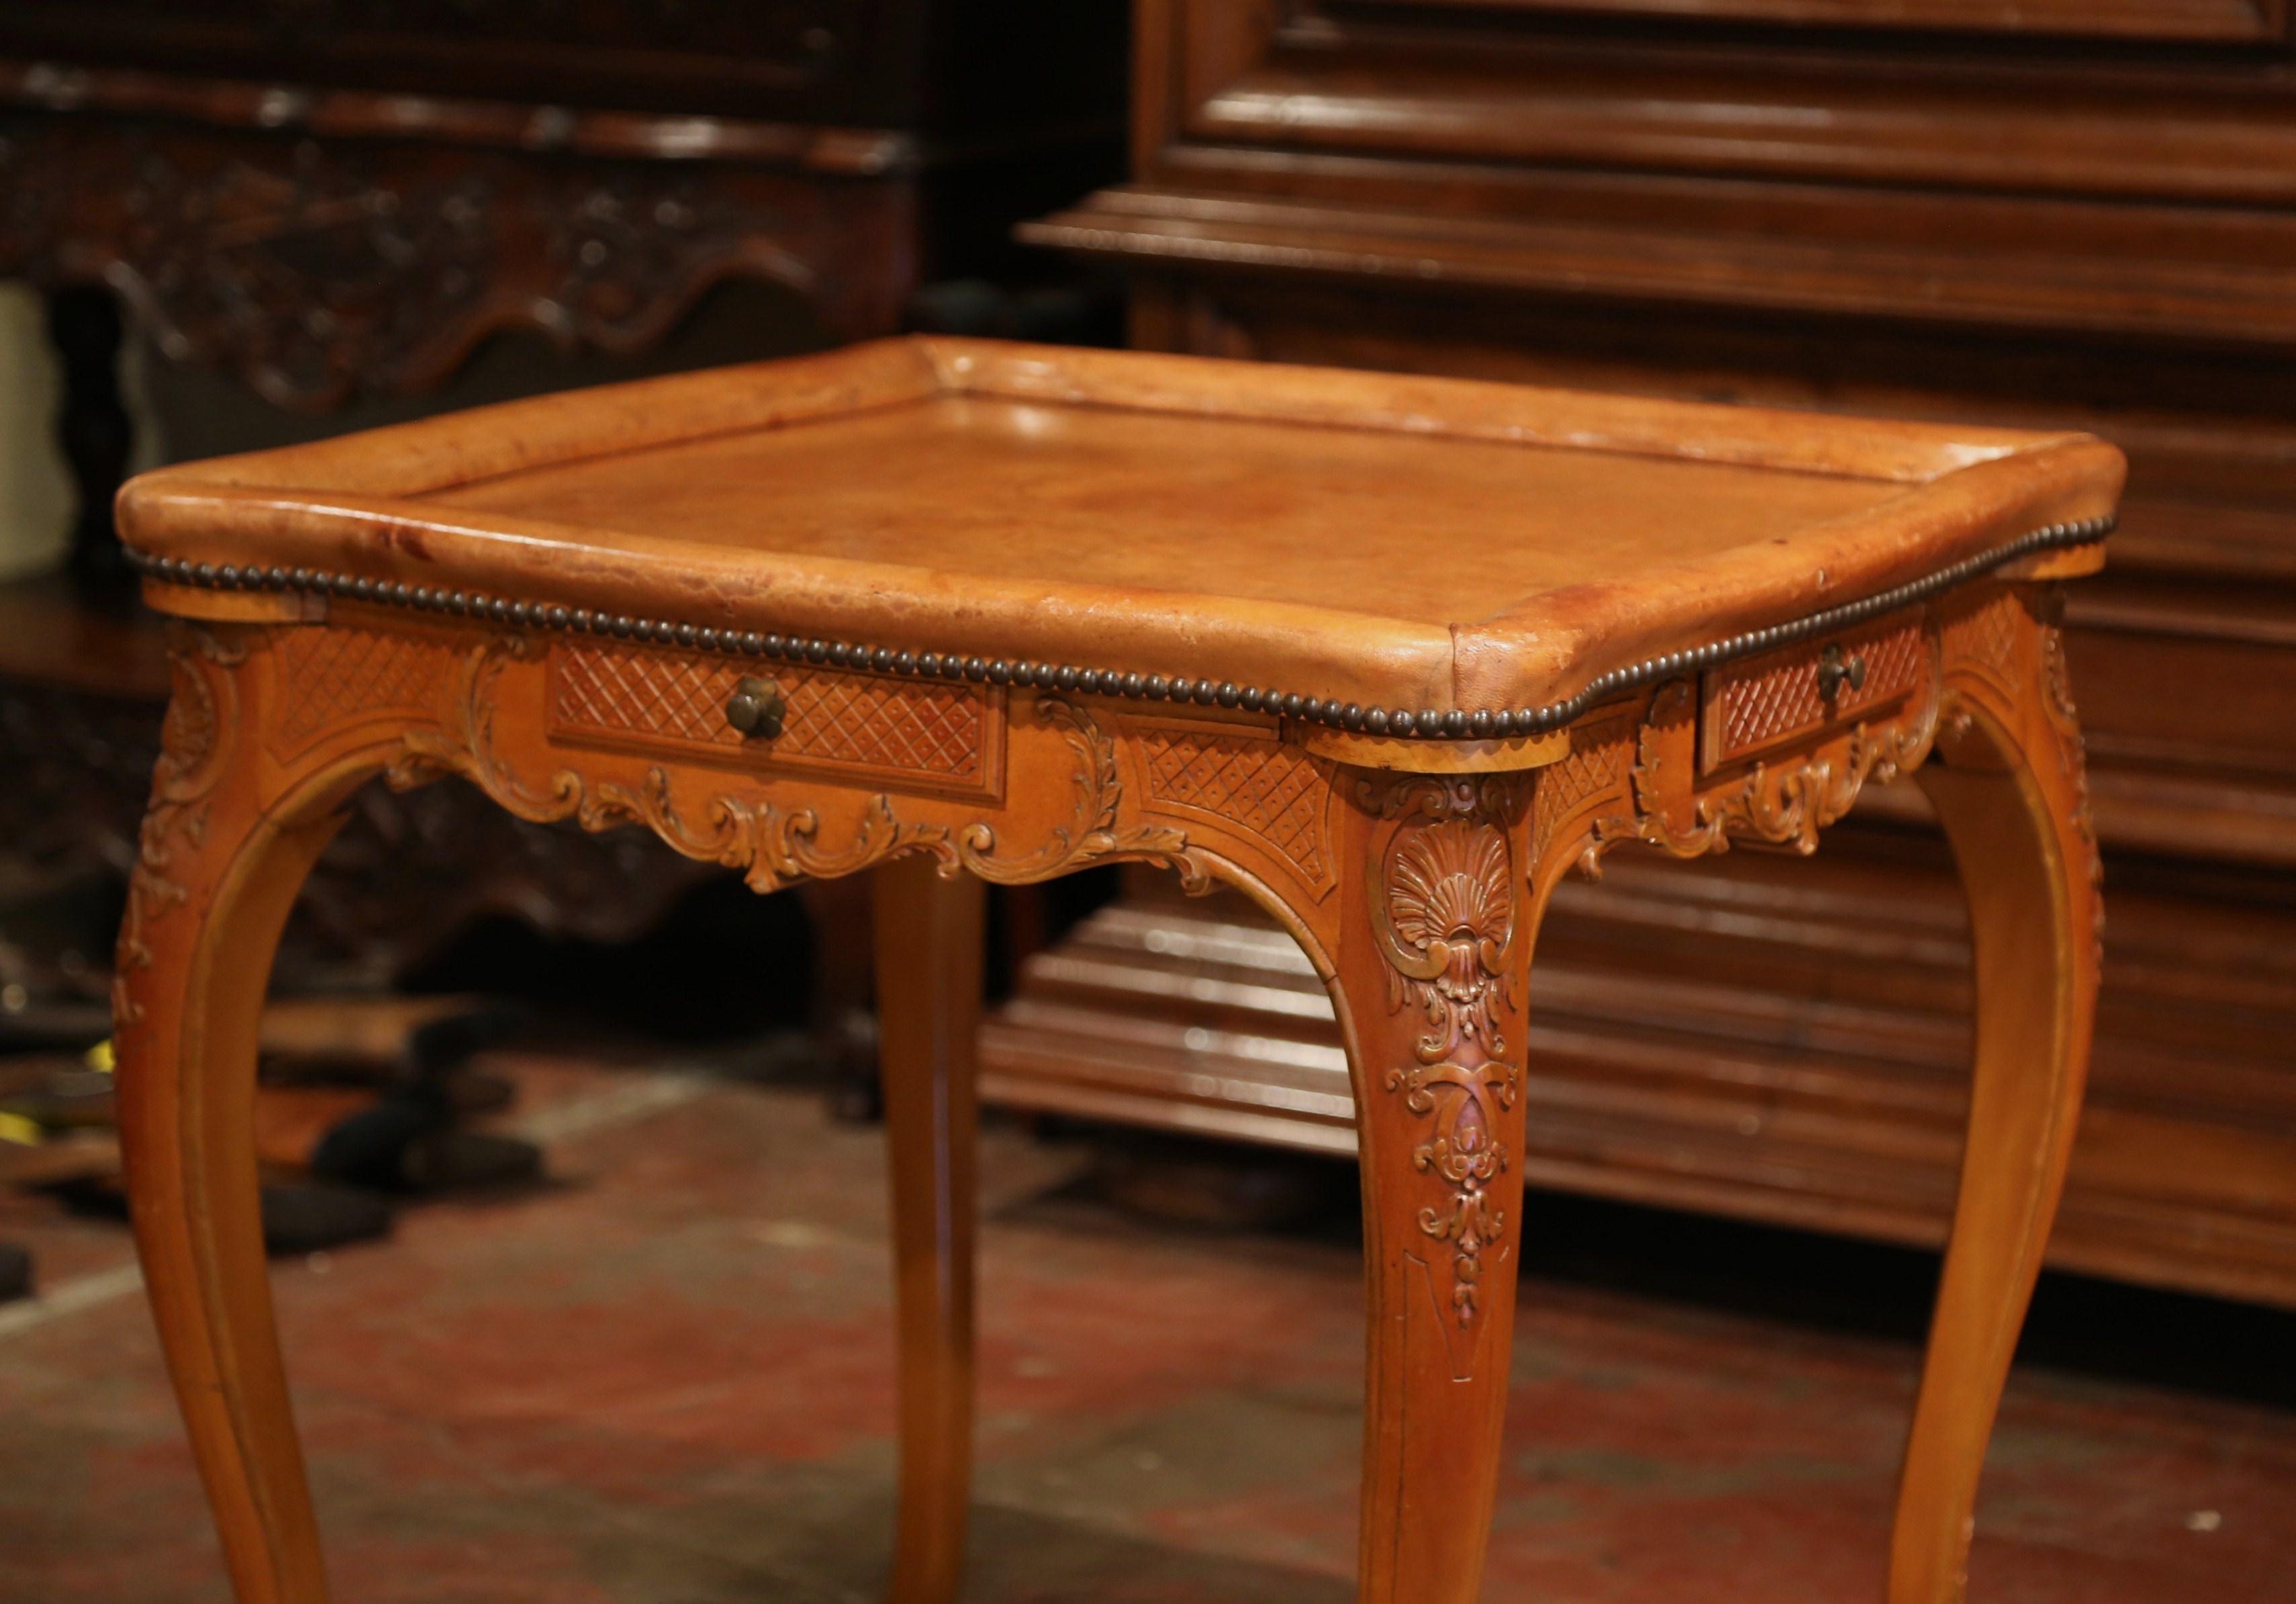 Crafted in France circa 1920 and square in shape, the fruit wood table stands on cabriole legs ending with escargot feet at the base. The table with a scalloped apron is decorated with carved leaf motifs at the shoulders. The small, charming table